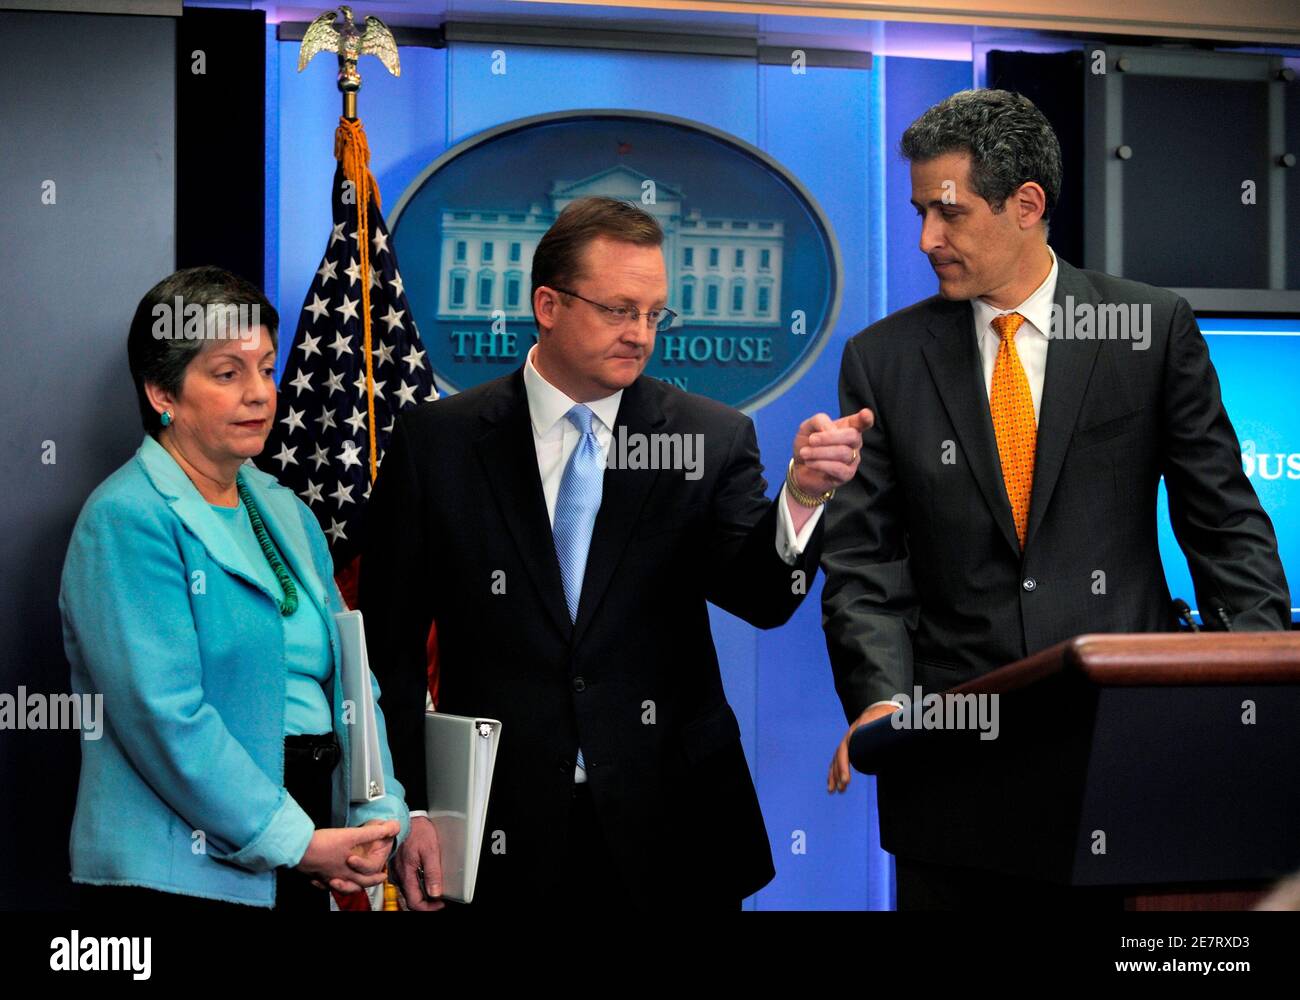 (L-R) U.S. Secretary of Homeland Security Janet Napolitano, White House Press Secretary Robert Gibbs and Acting Director of the Centers for Disease Control and Prevention Dr. Richard Besser gather for a briefing on possible U.S. emergency measures in the event of a swine flu outbreak, in Washington April 26, 2009. Twenty cases of swine flu have been confirmed in the United States as the White House stepped up efforts to monitor the outbreak, U.S. officials said on Sunday.  REUTERS/Mike Theiler   (UNITED STATES POLITICS HEALTH) Stock Photo